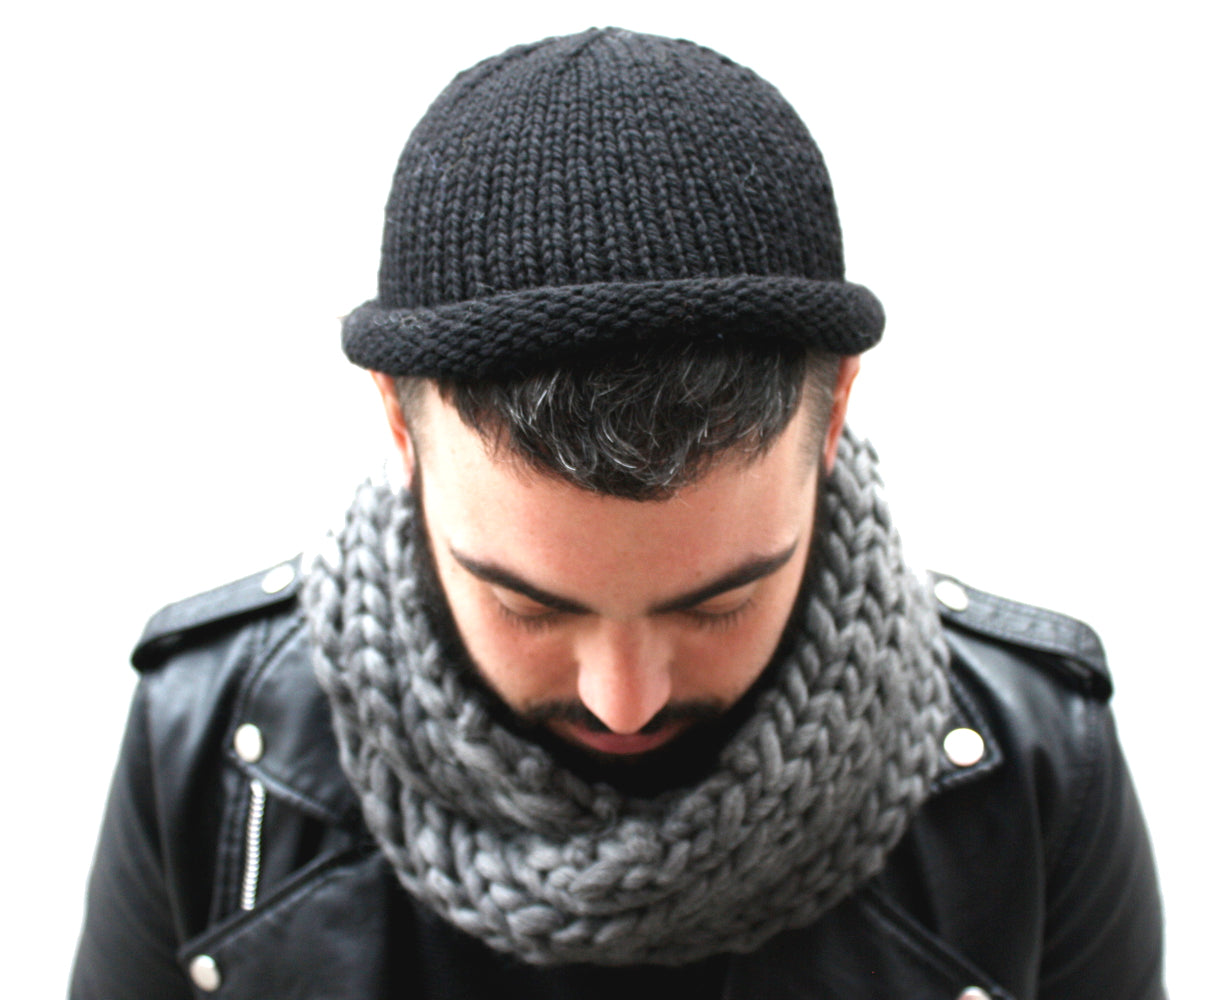 Arctic Tundra Cowl in Black, hand knit in Canada